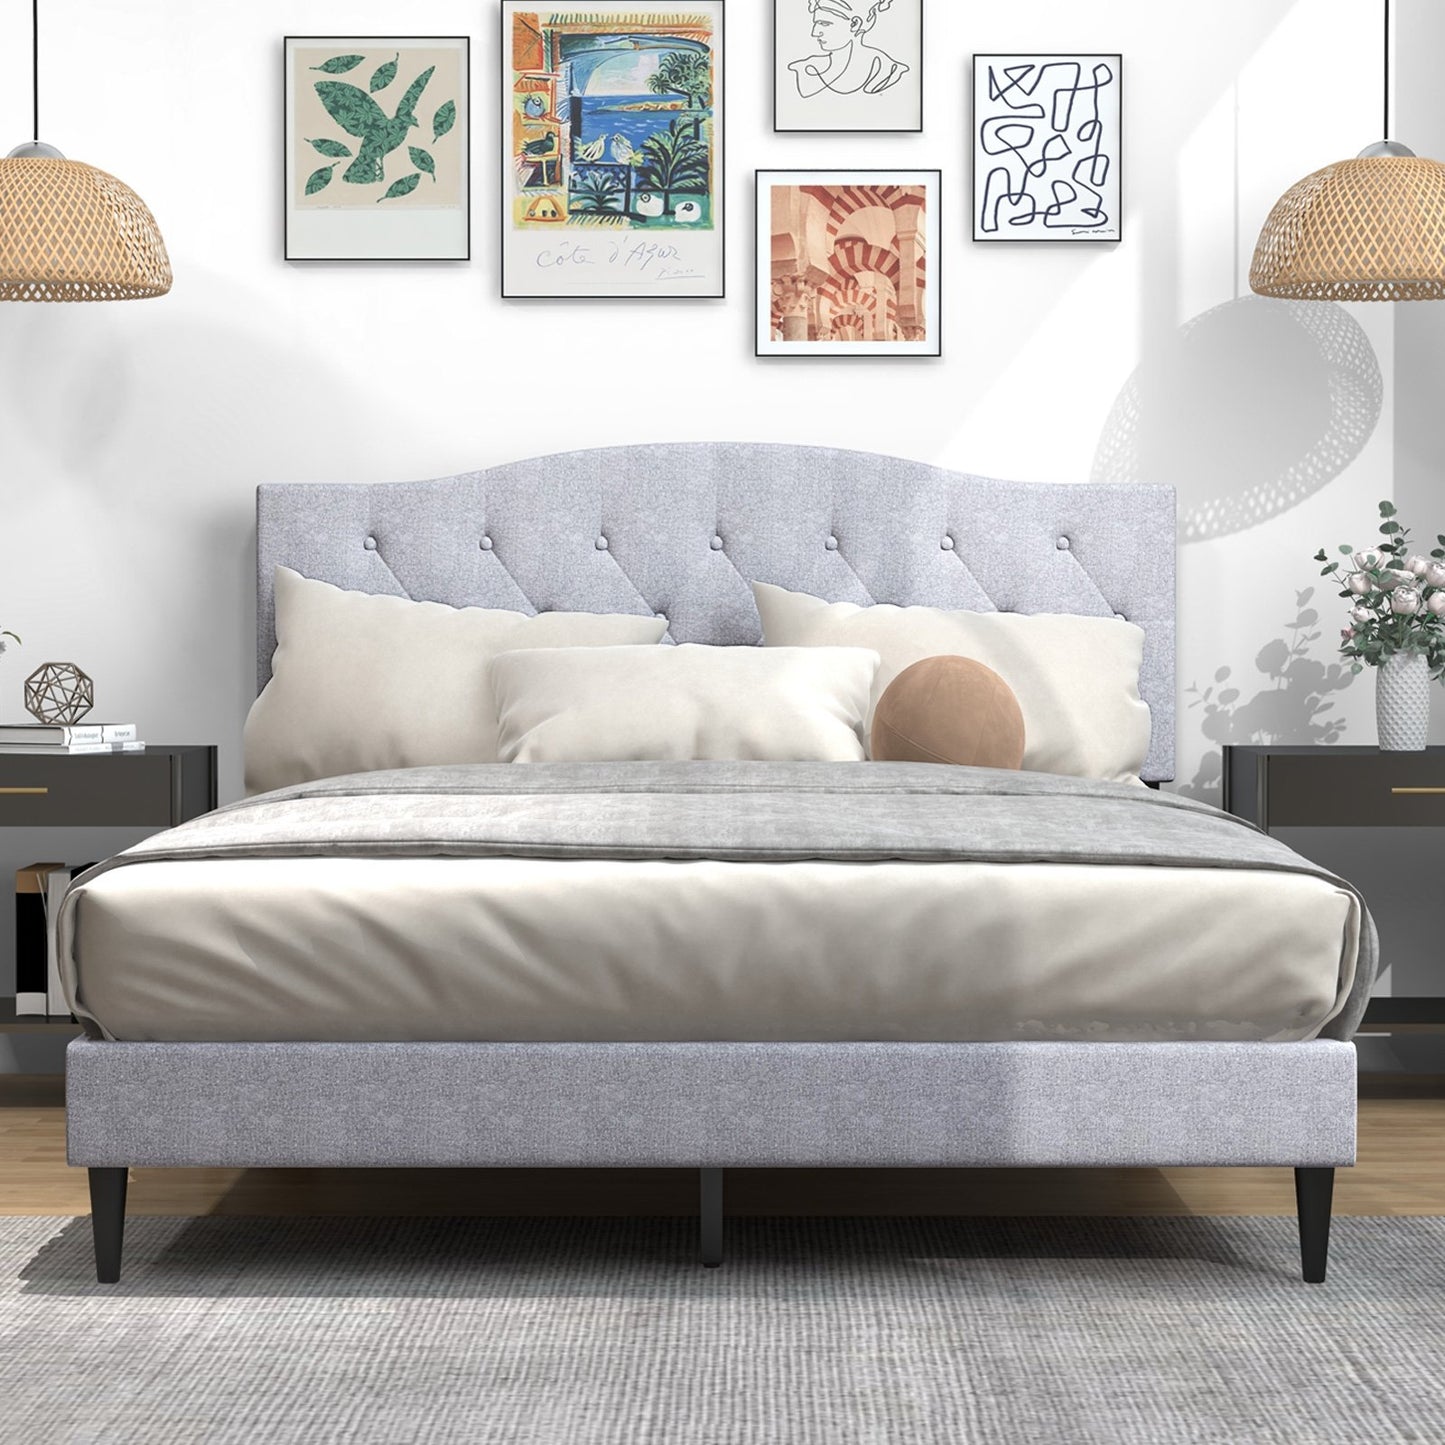 Queen Size Upholstered Platform Bed with Button Tufted Headboard-Queen Size, Gray